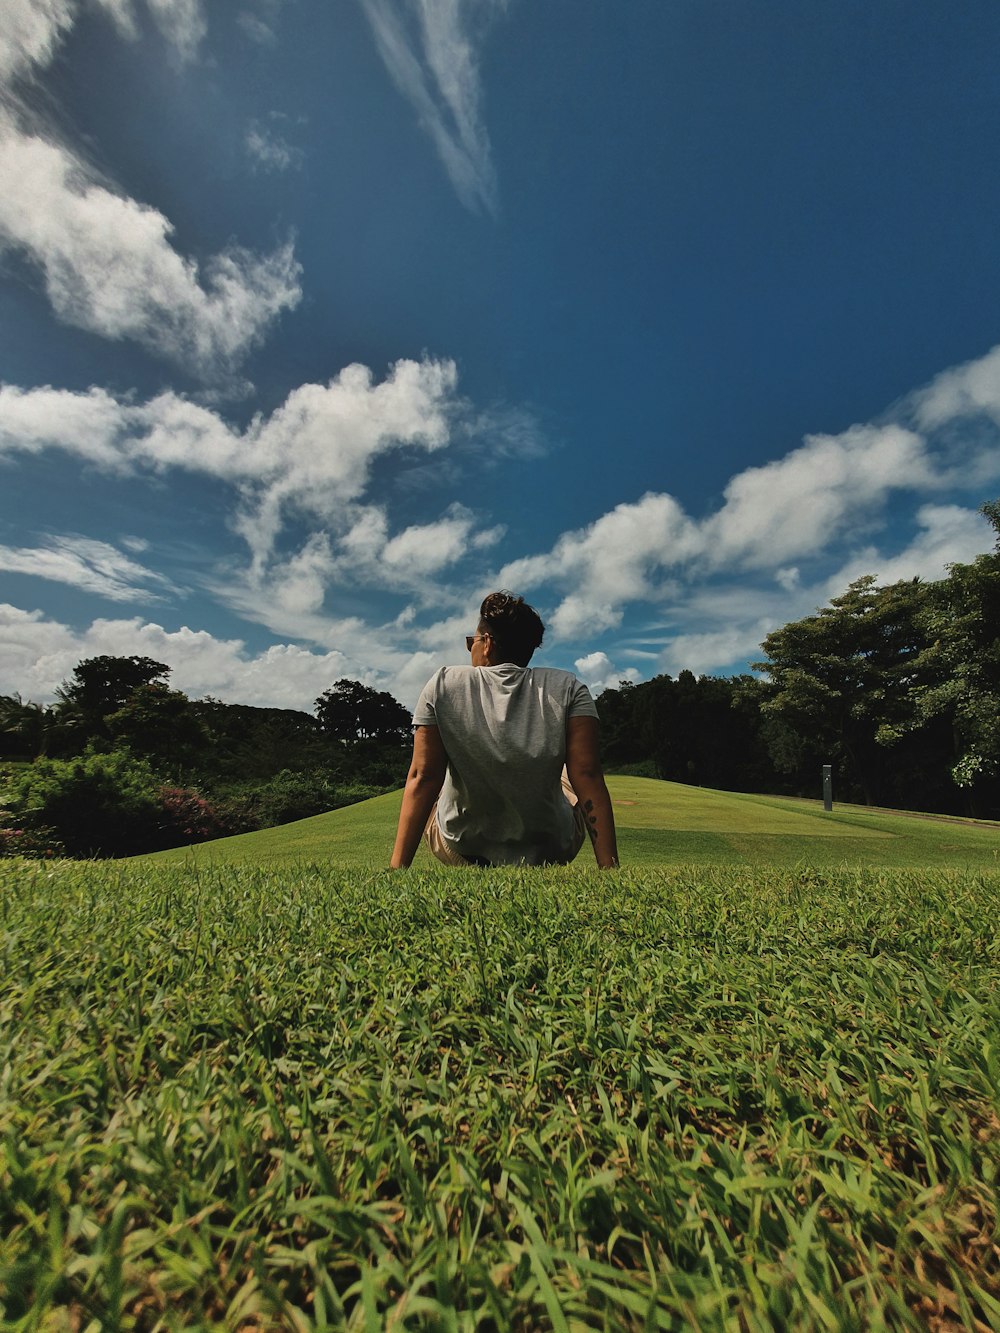 man in white t-shirt sitting on green grass field under blue and white cloudy sky